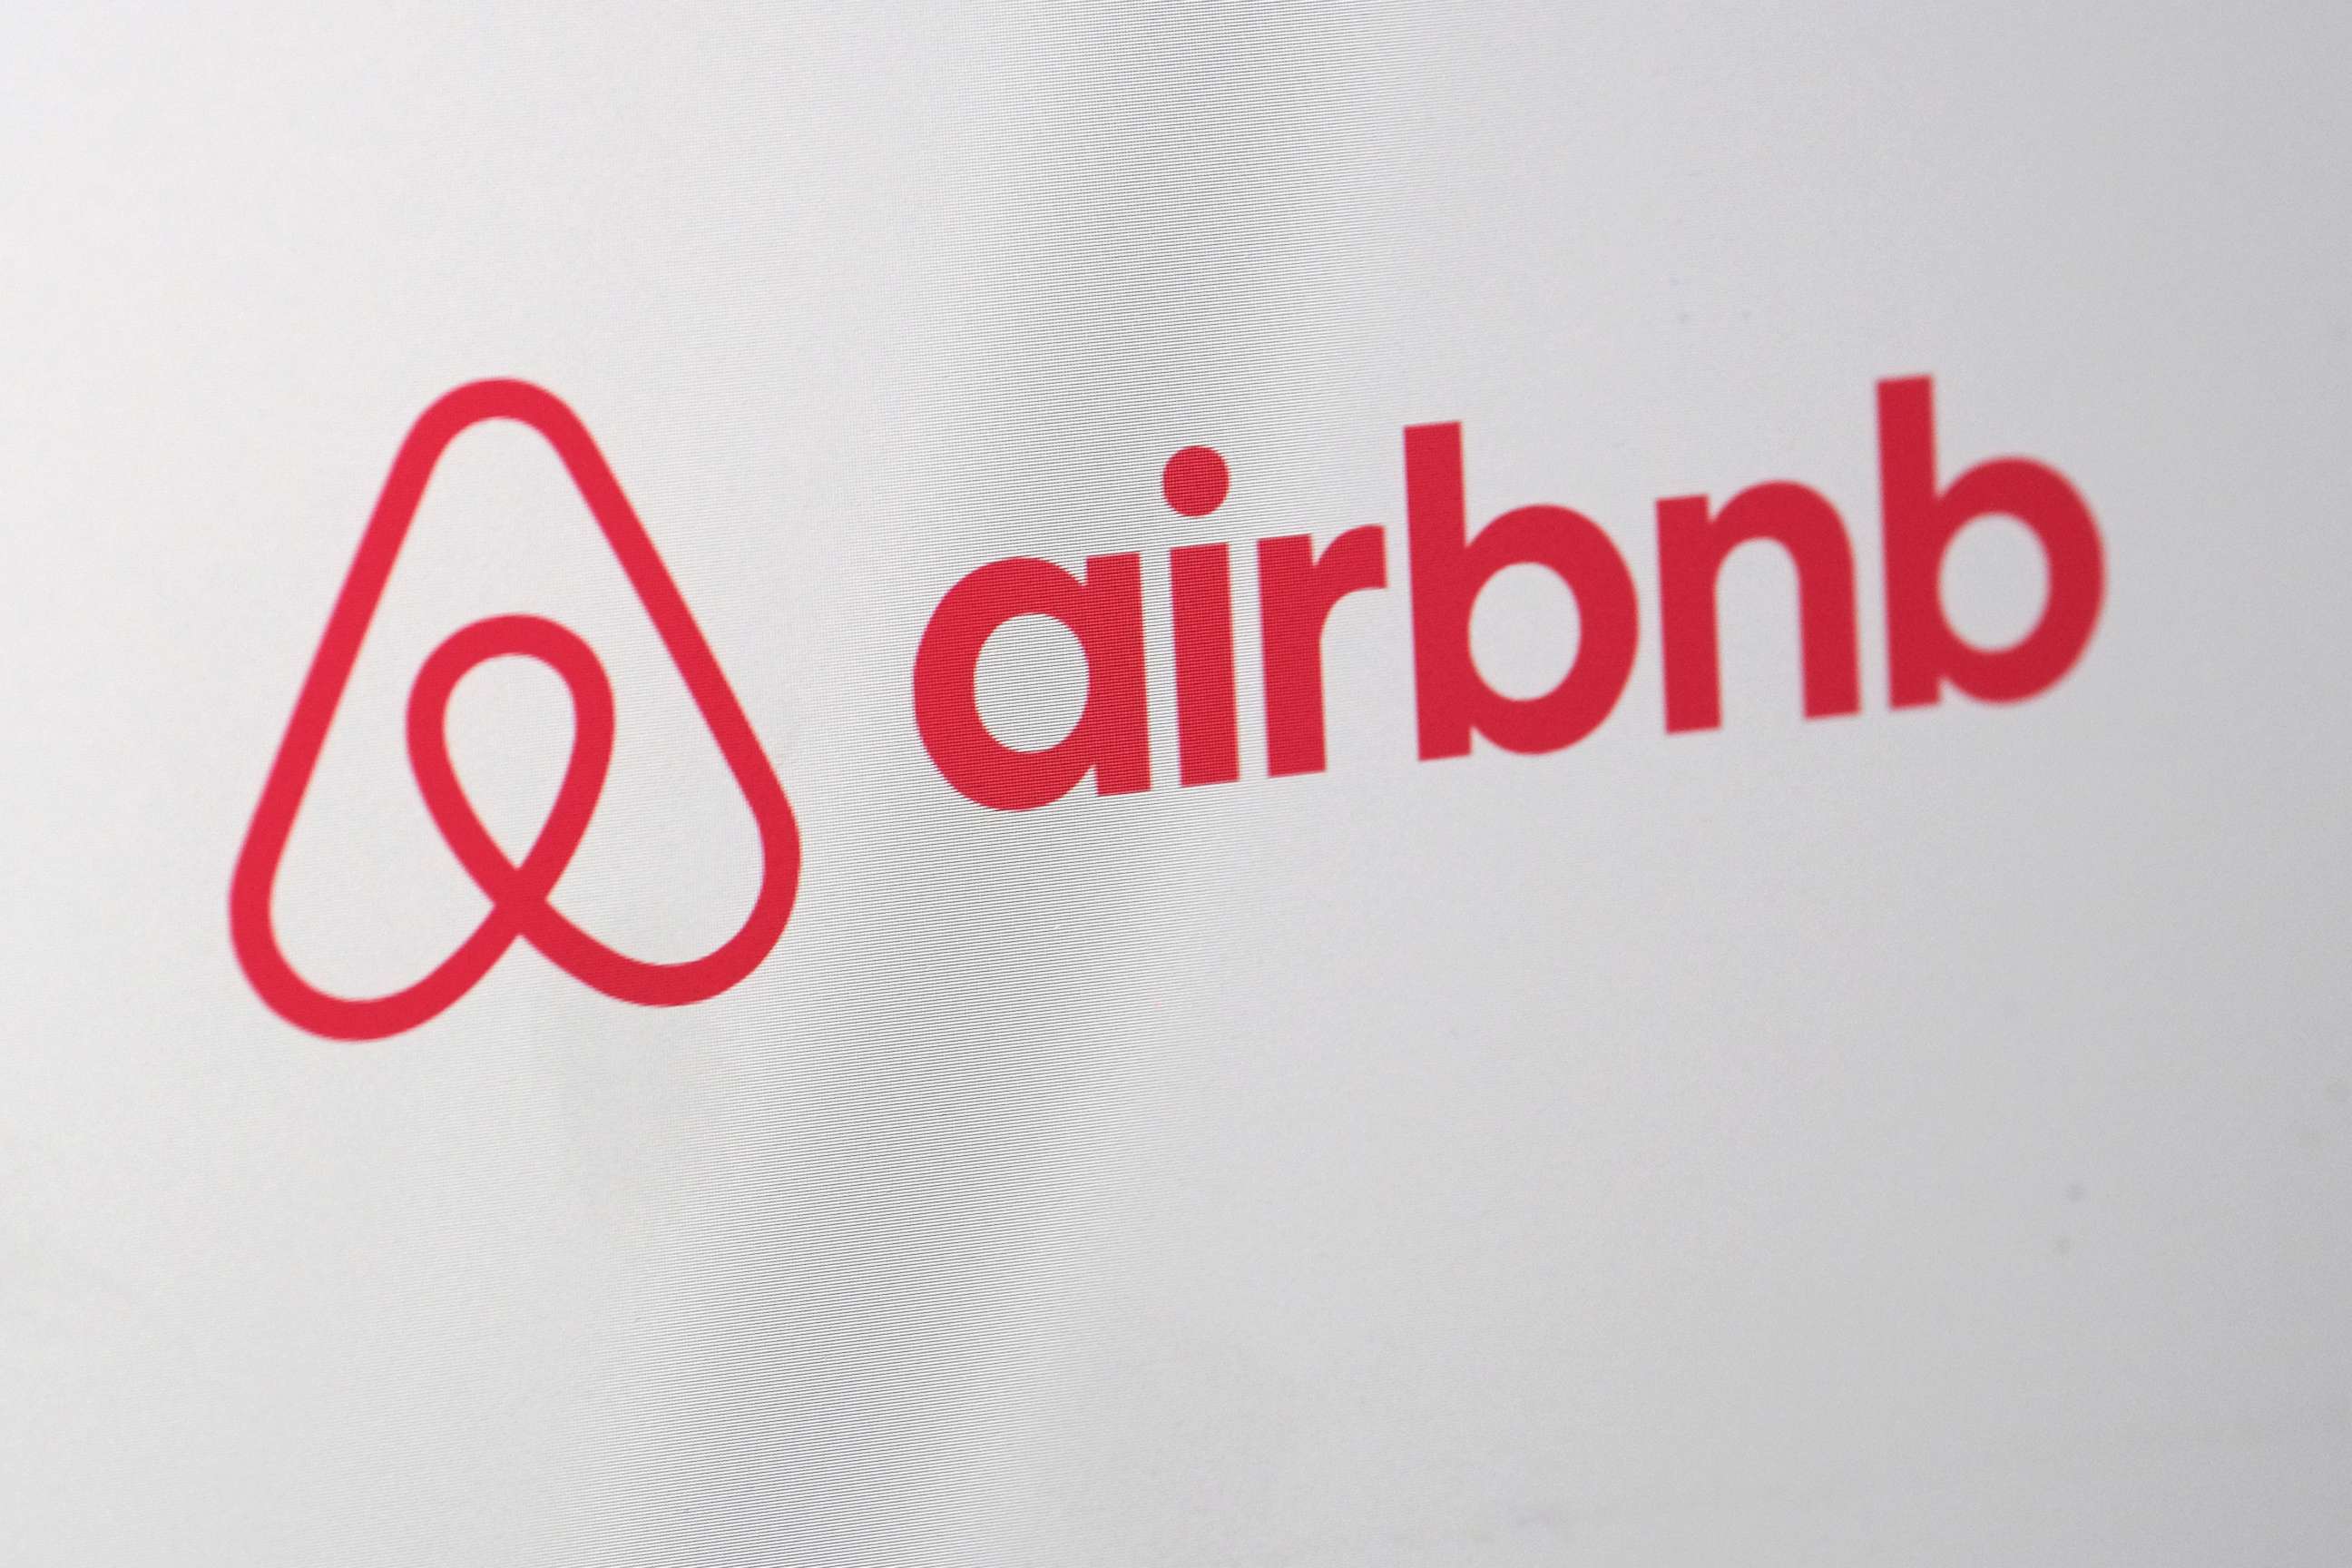 PHOTO: A logo of Airbnb is is displayed on a computer screen, April 20, 2020.